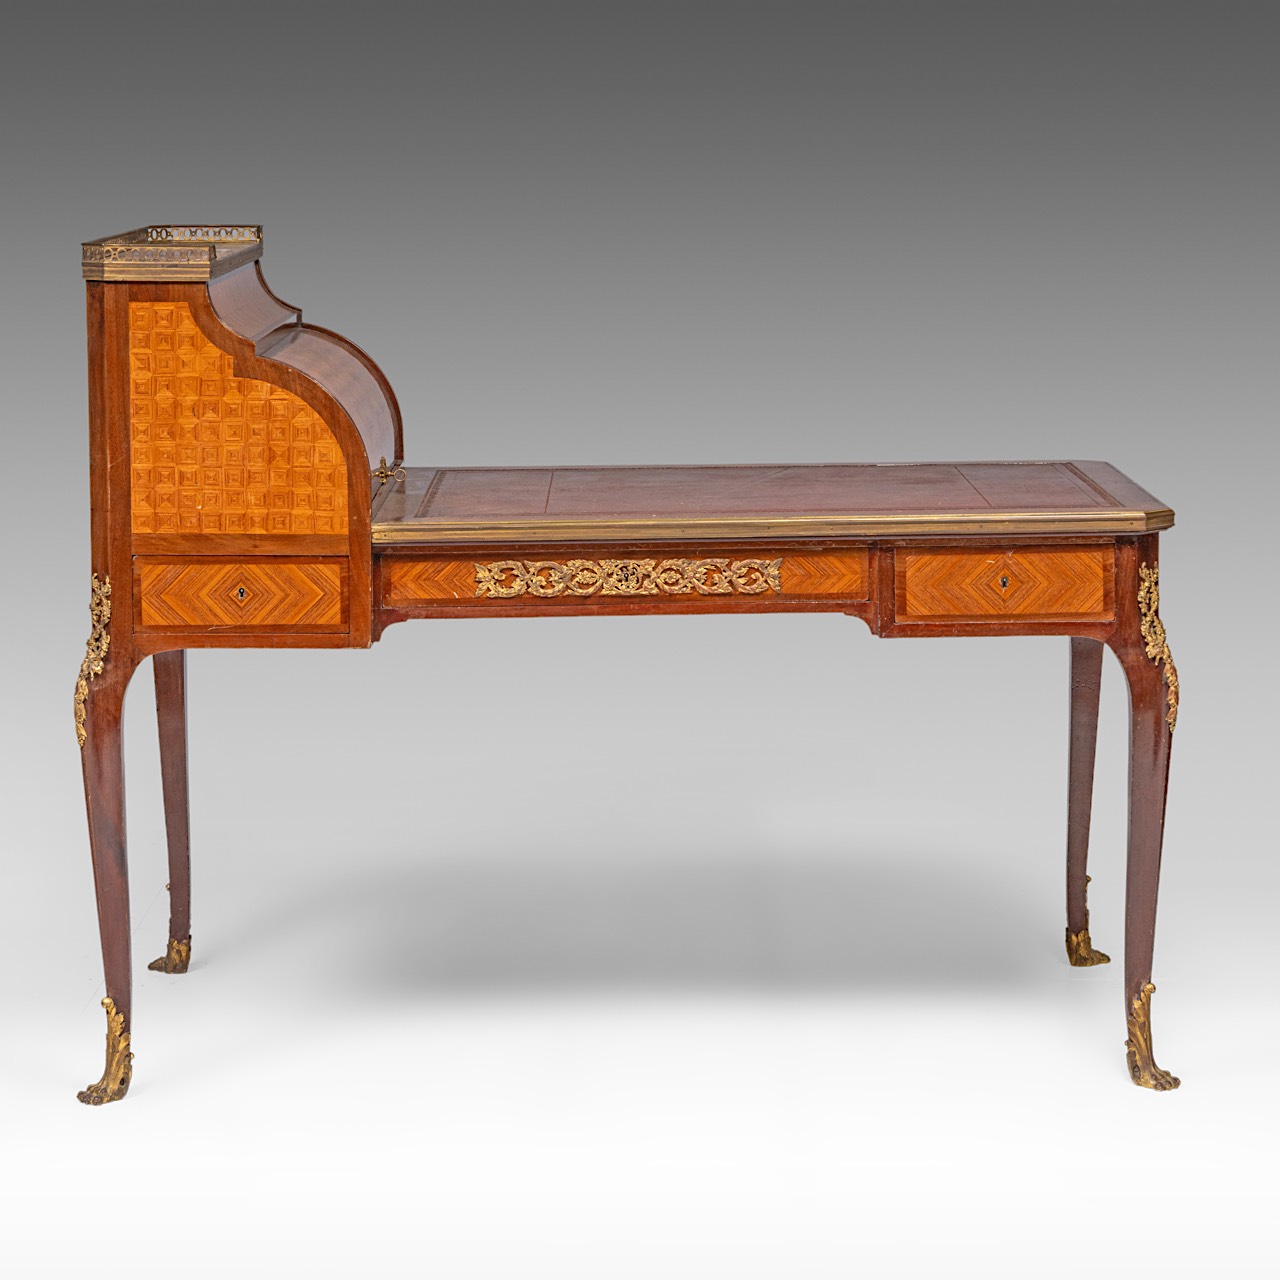 A leather-topped Transitional-style bureau plat and rolltop desk with parquetry and gilt bronze moun - Image 8 of 9